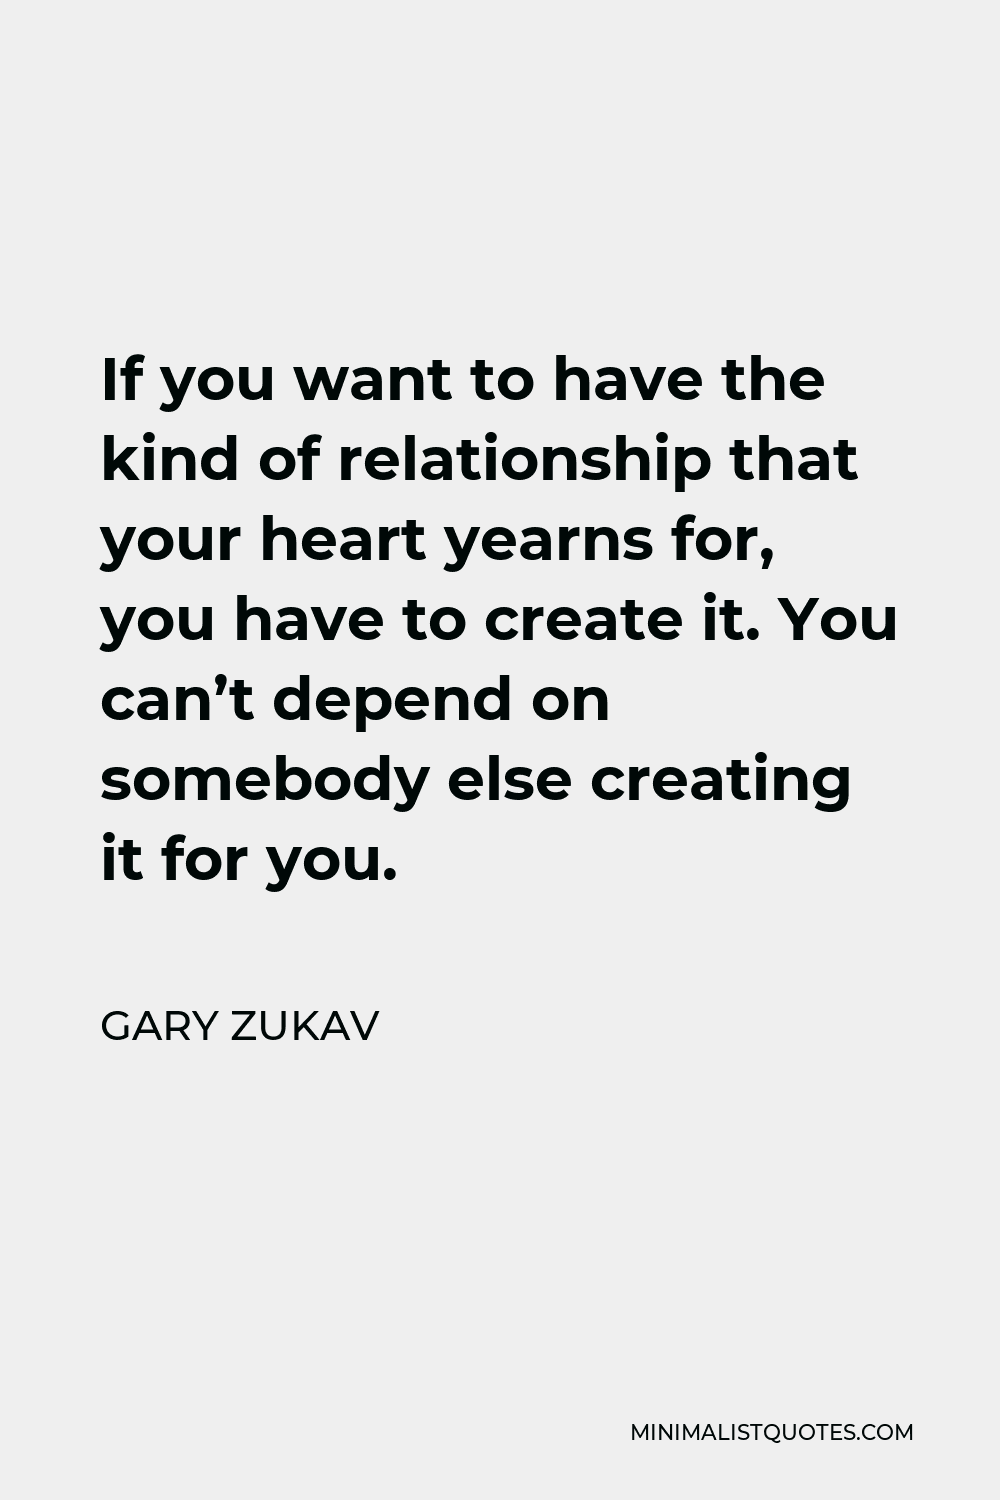 Gary Zukav Quote - If you want to have the kind of relationship that your heart yearns for, you have to create it. You can’t depend on somebody else creating it for you.